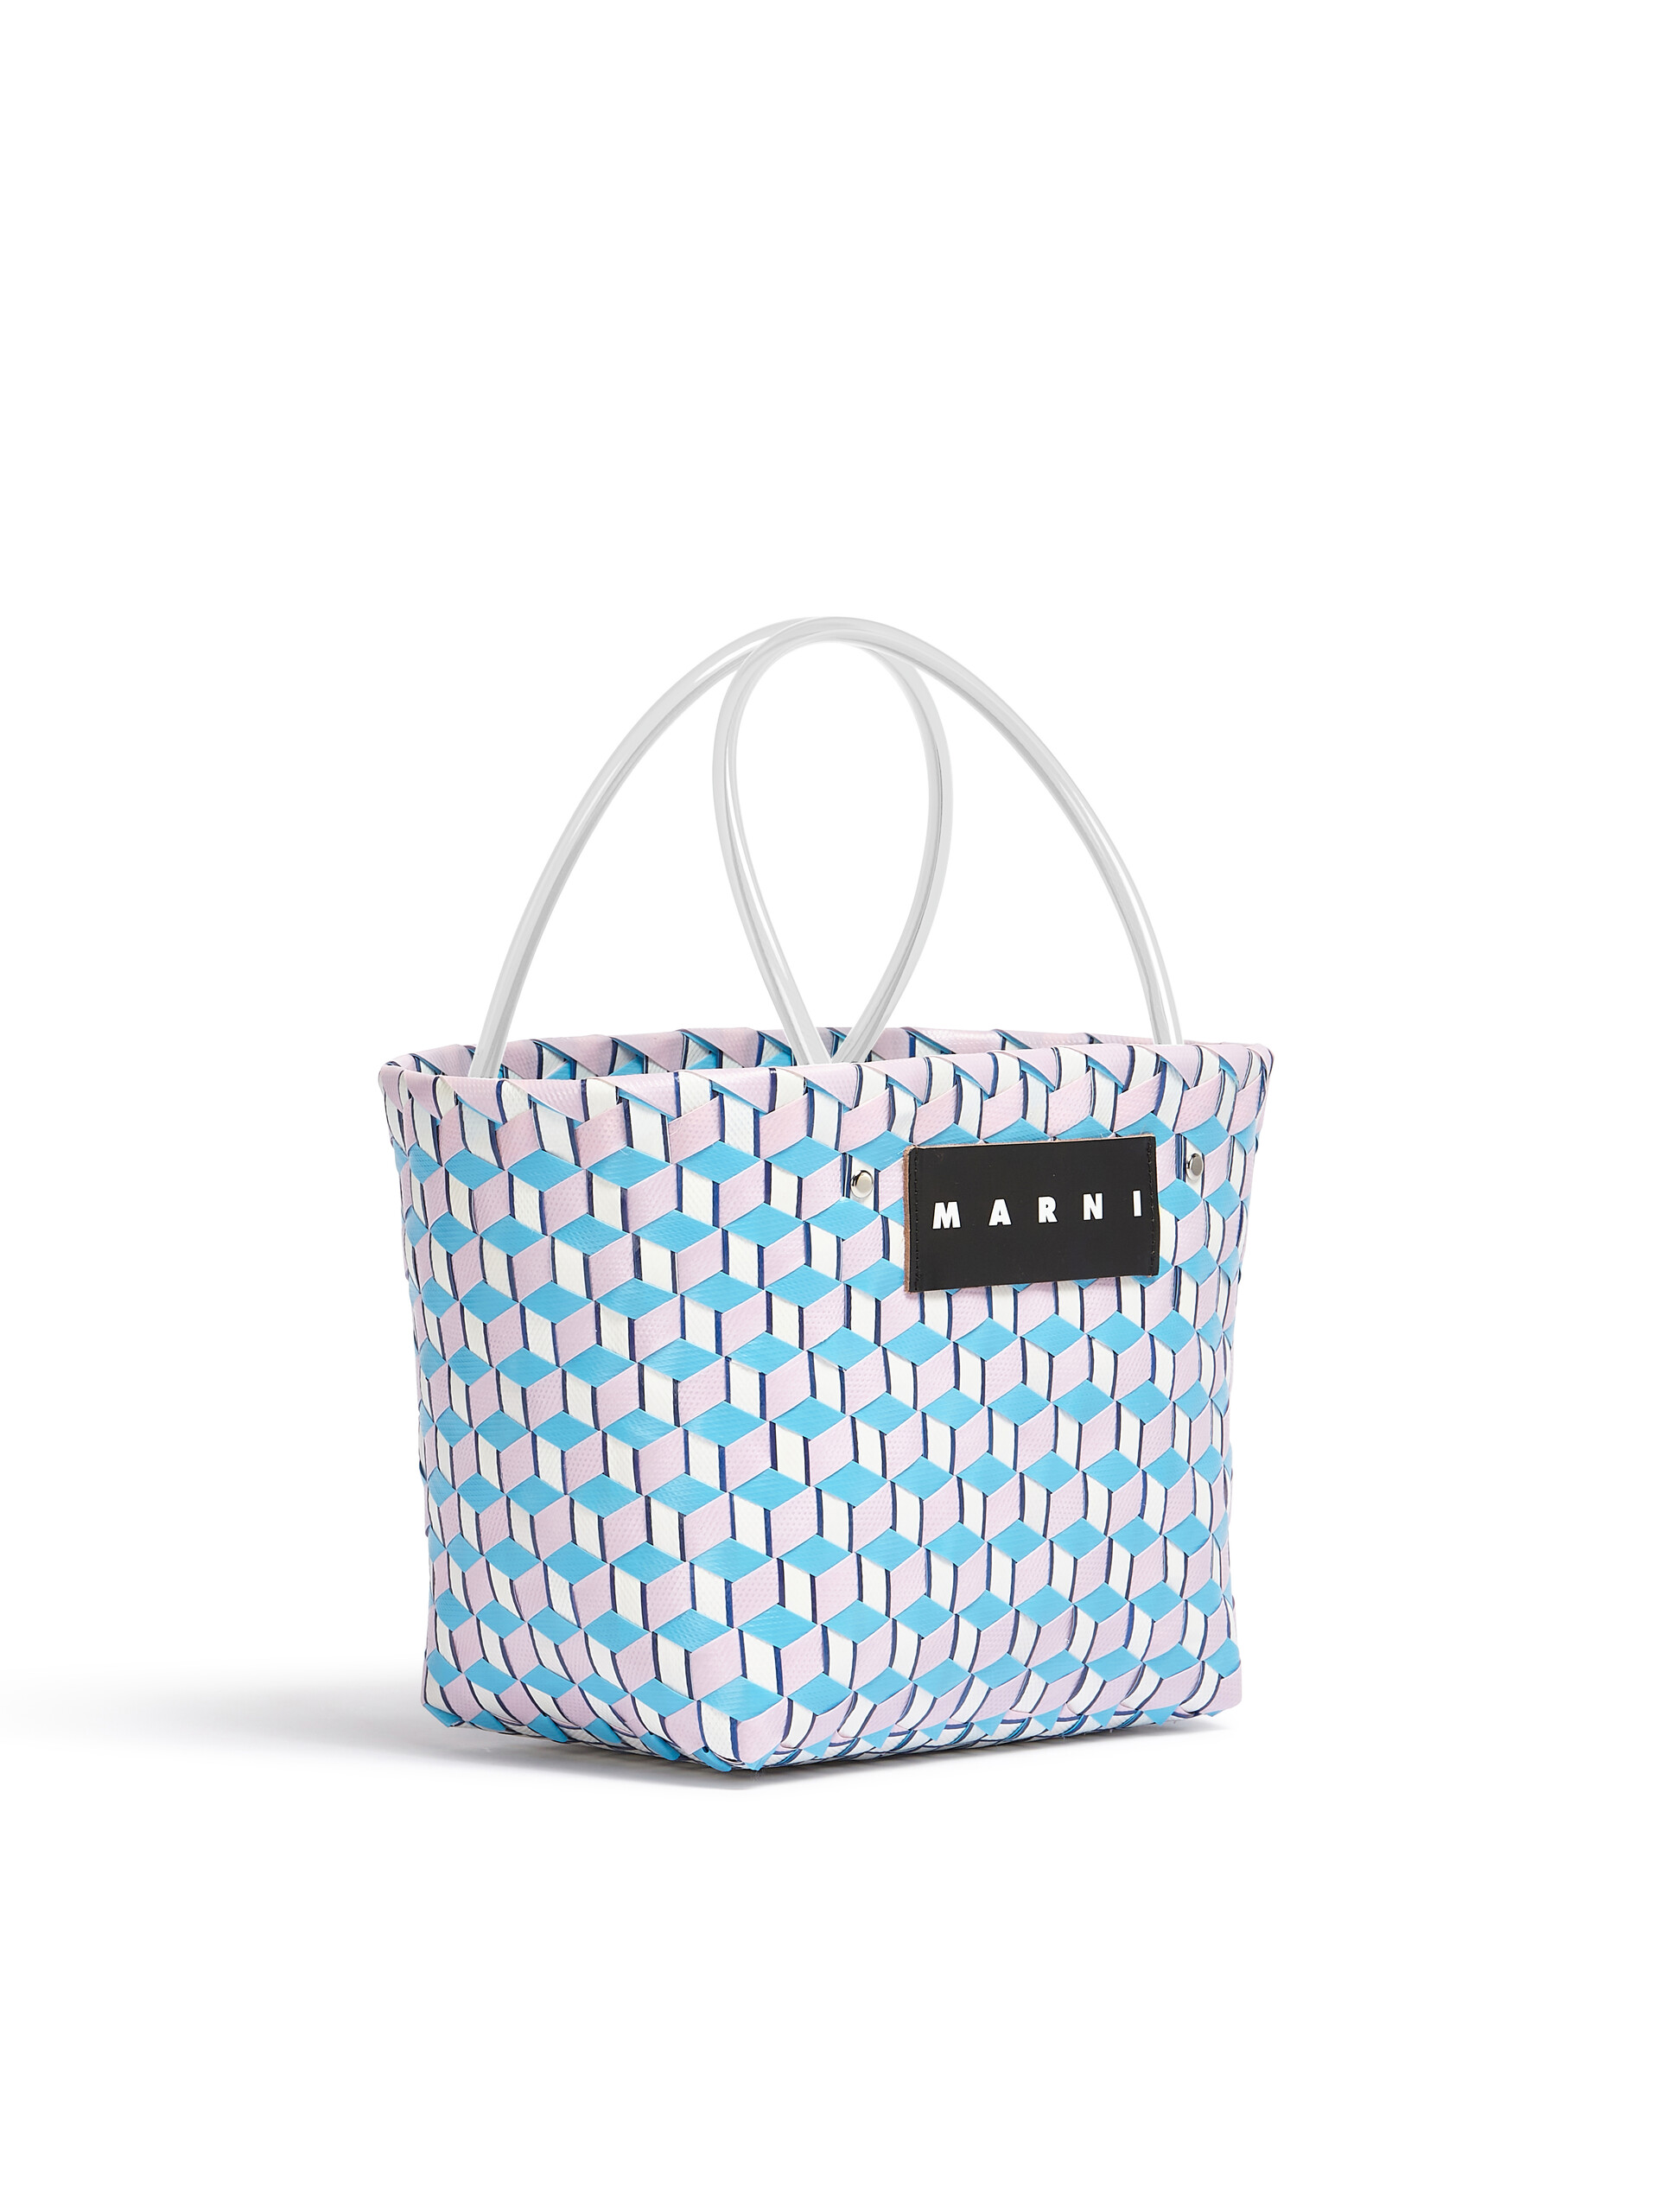 MARNI MARKET 3D BAG in pale blue cube woven material - Bags - Image 2